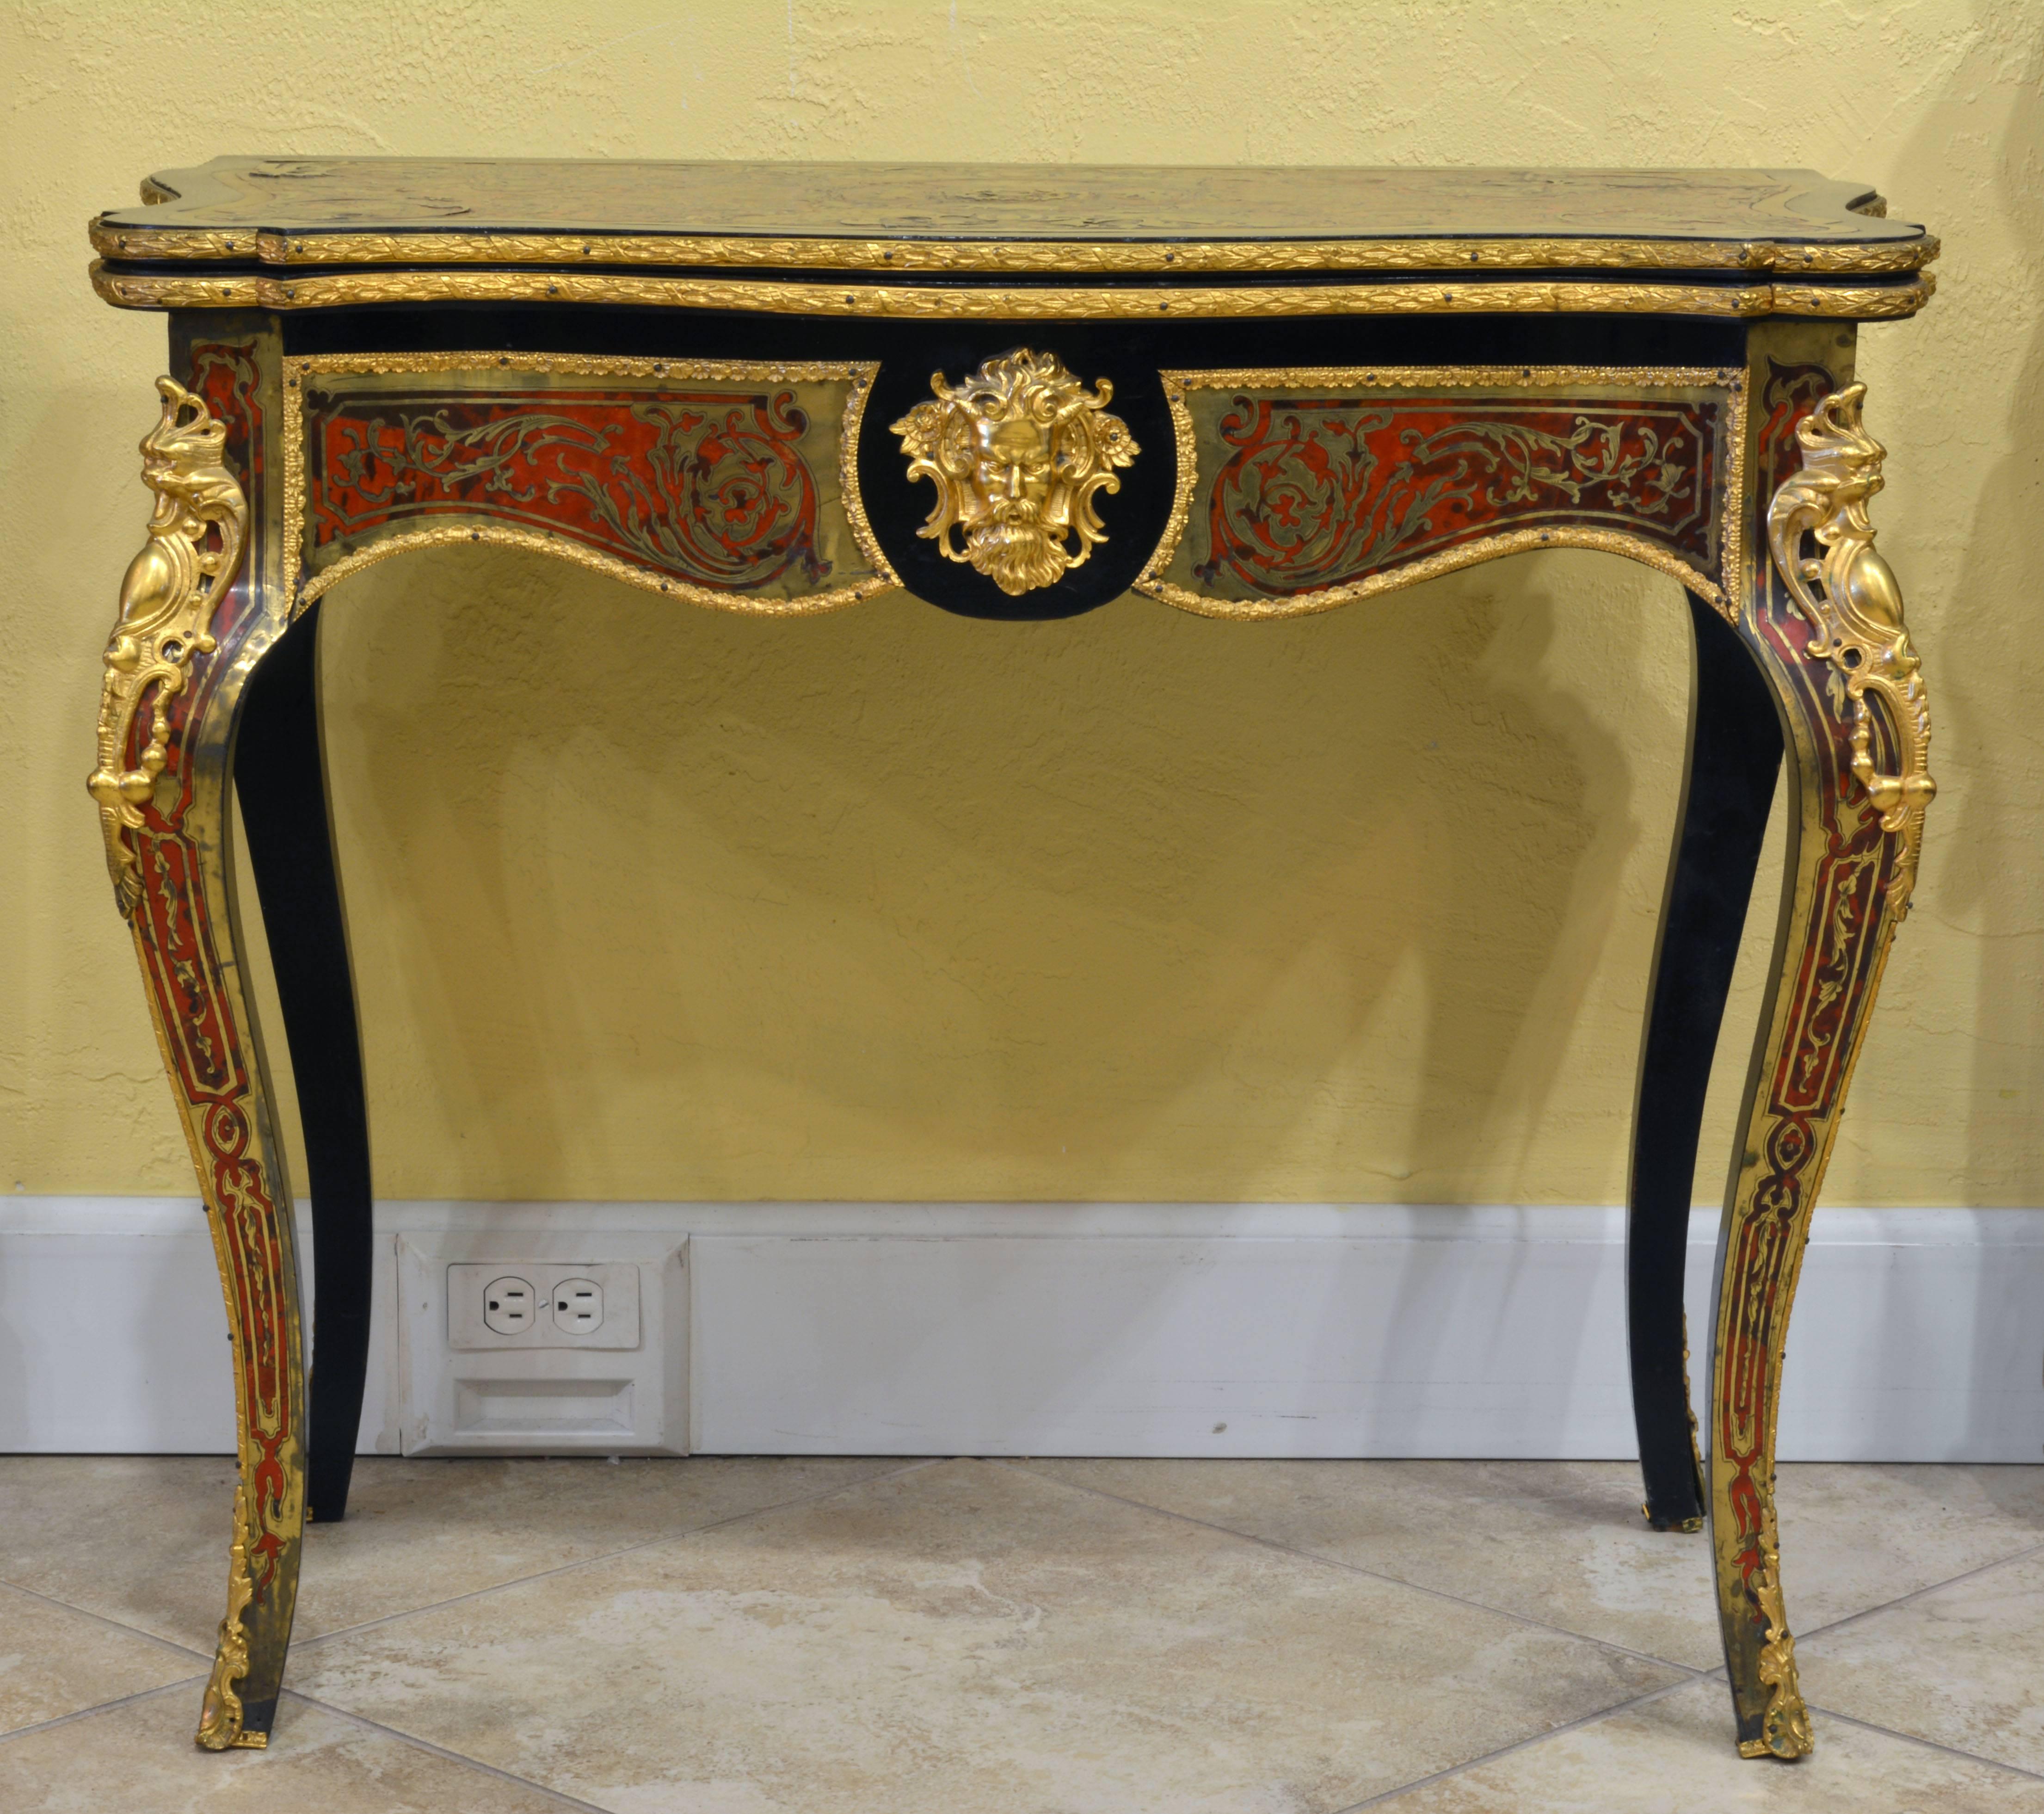 A refined Boulle table from the mid-1800s. The surface consists of Dyed tortoise shell inlay combined with bronze doré arabesques and lacquer finish. The top rotates to create a game table. The felt lined elegantly shaped top with borders of boulle